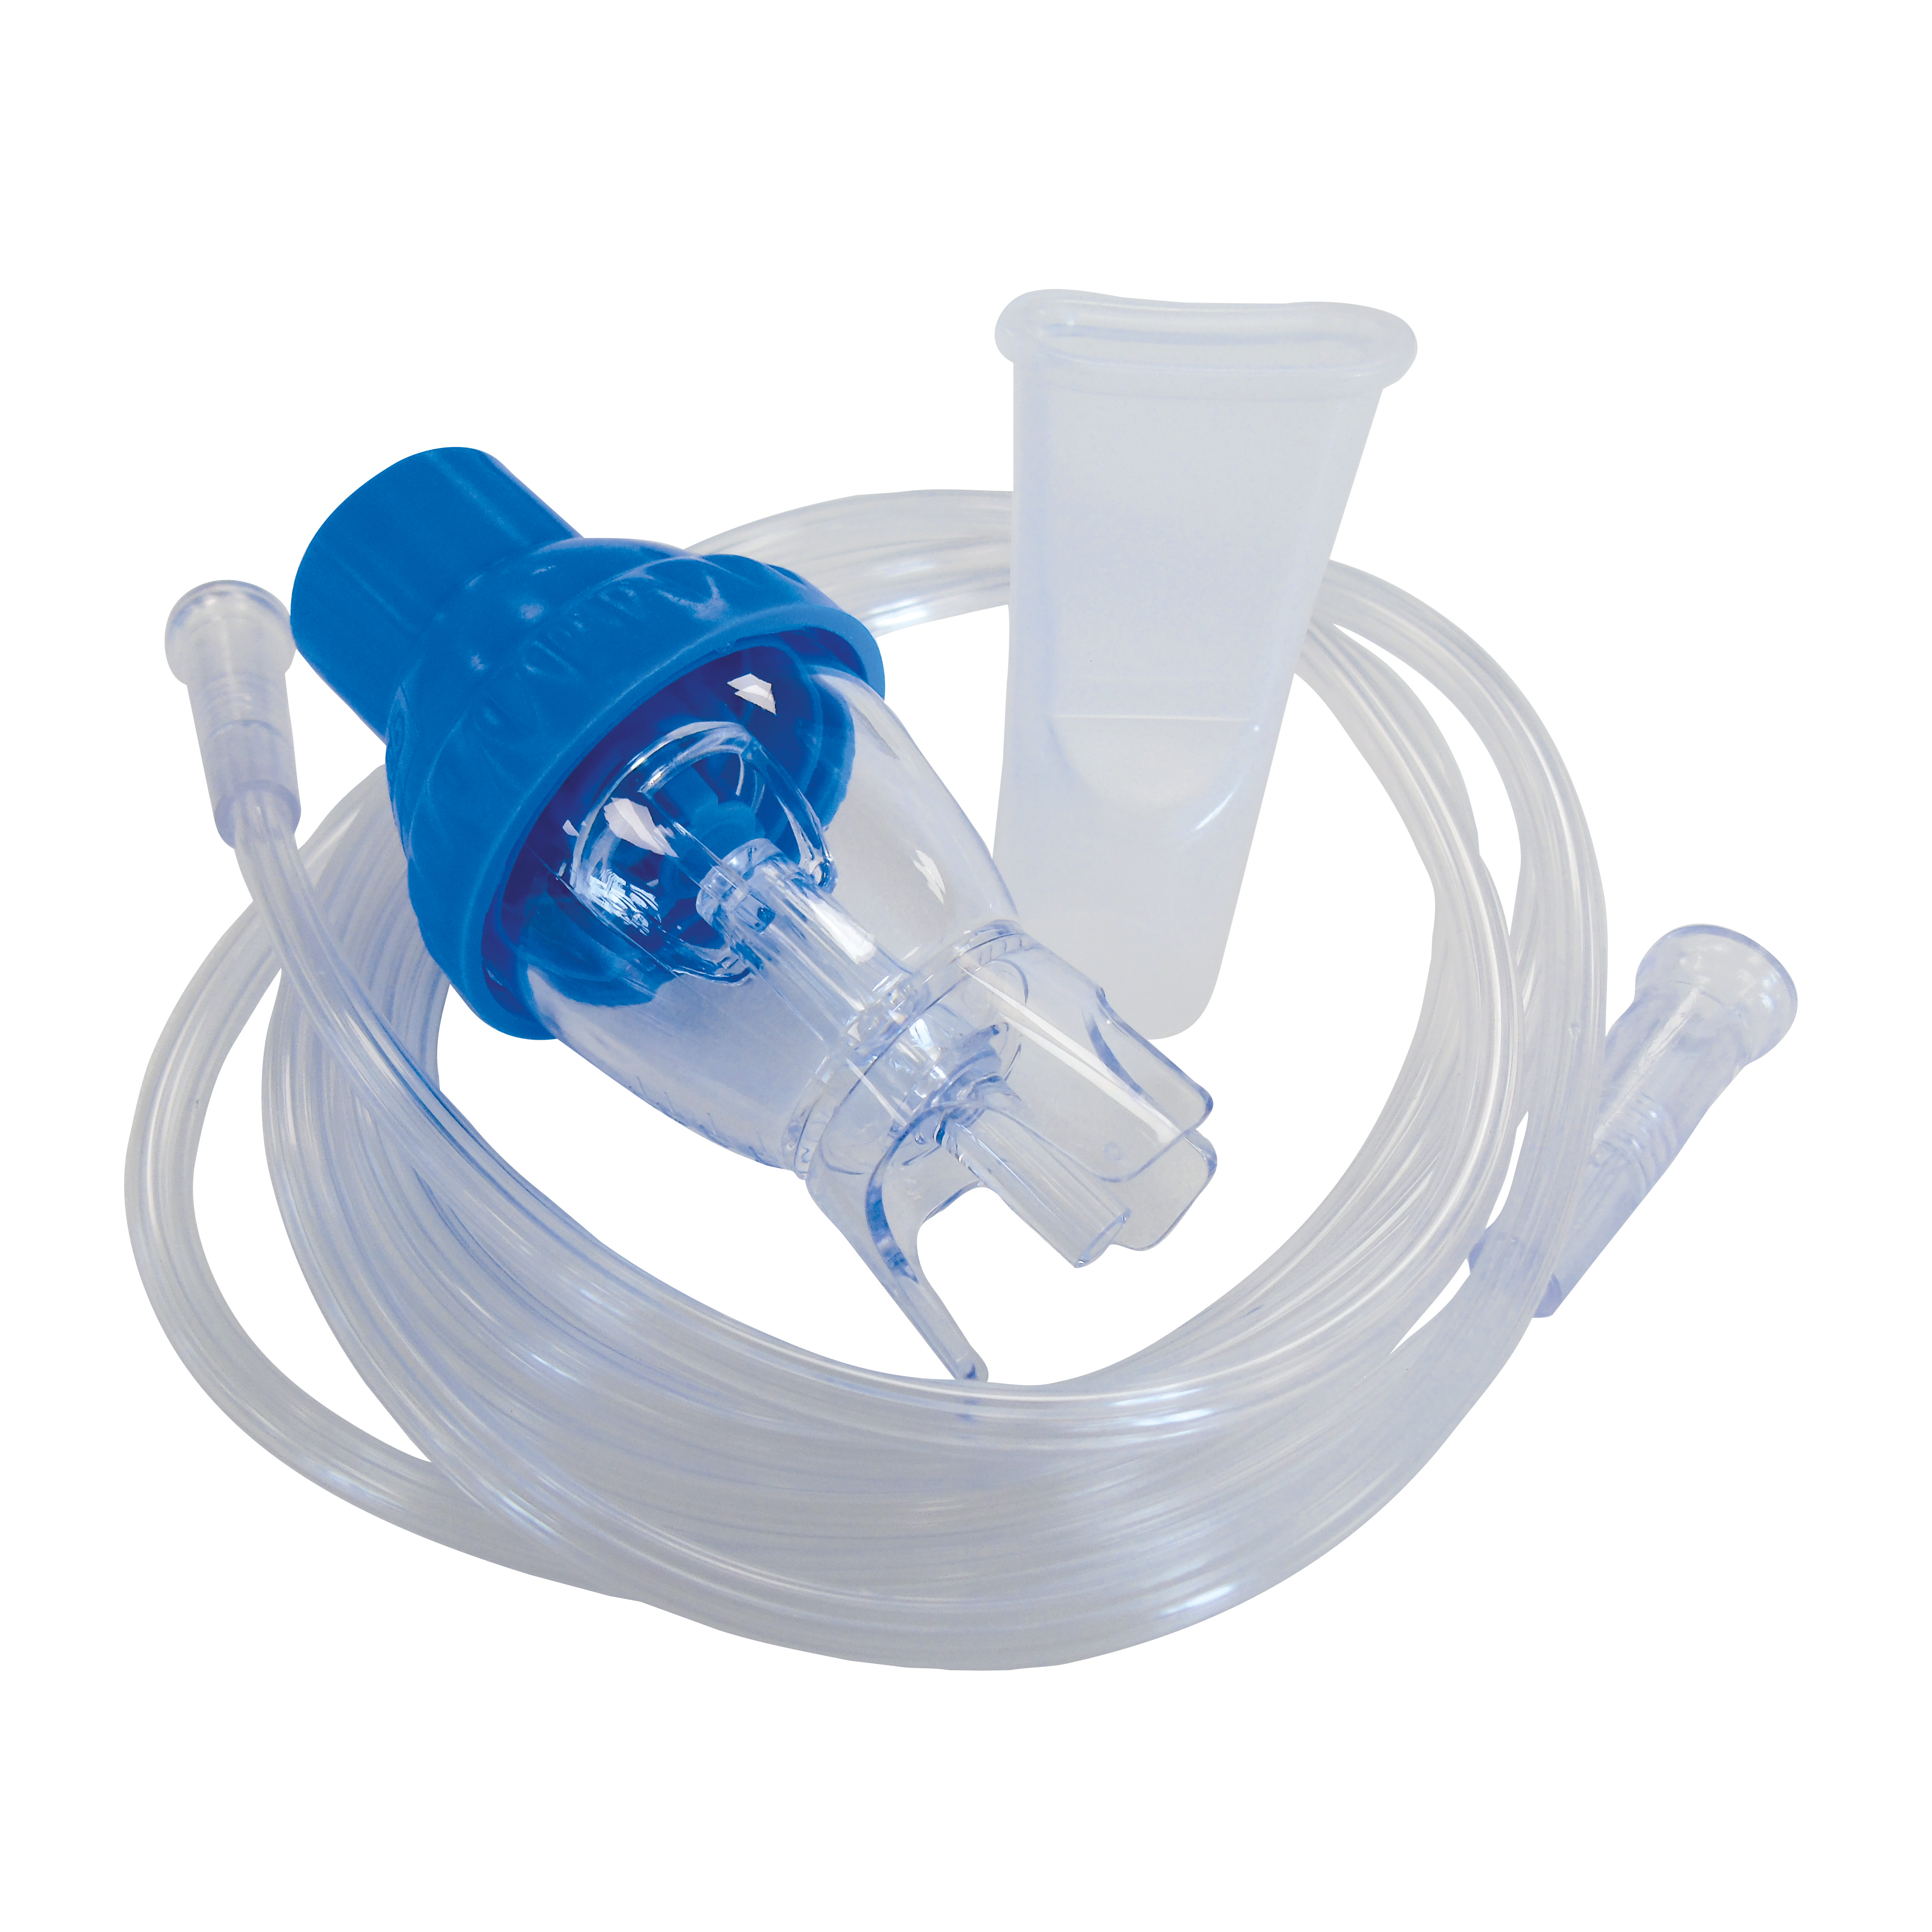 Disposable Nebulizer with mouthpiece